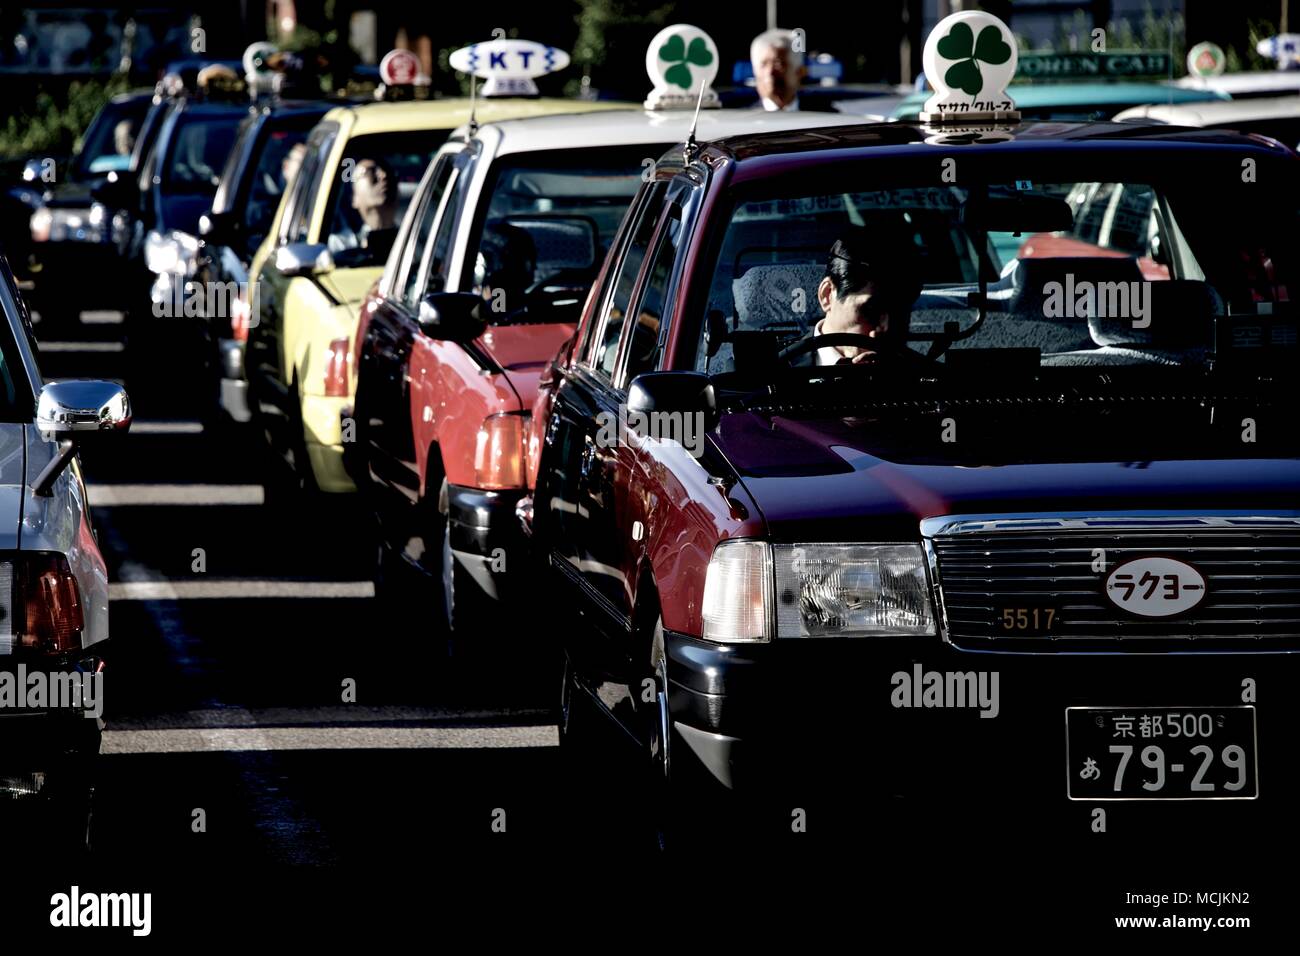 Walking out of the train station in Kyoto, Japan, many taxi cab drivers can be seen waiting for Fares seemingly in a state of boredom. Stock Photo